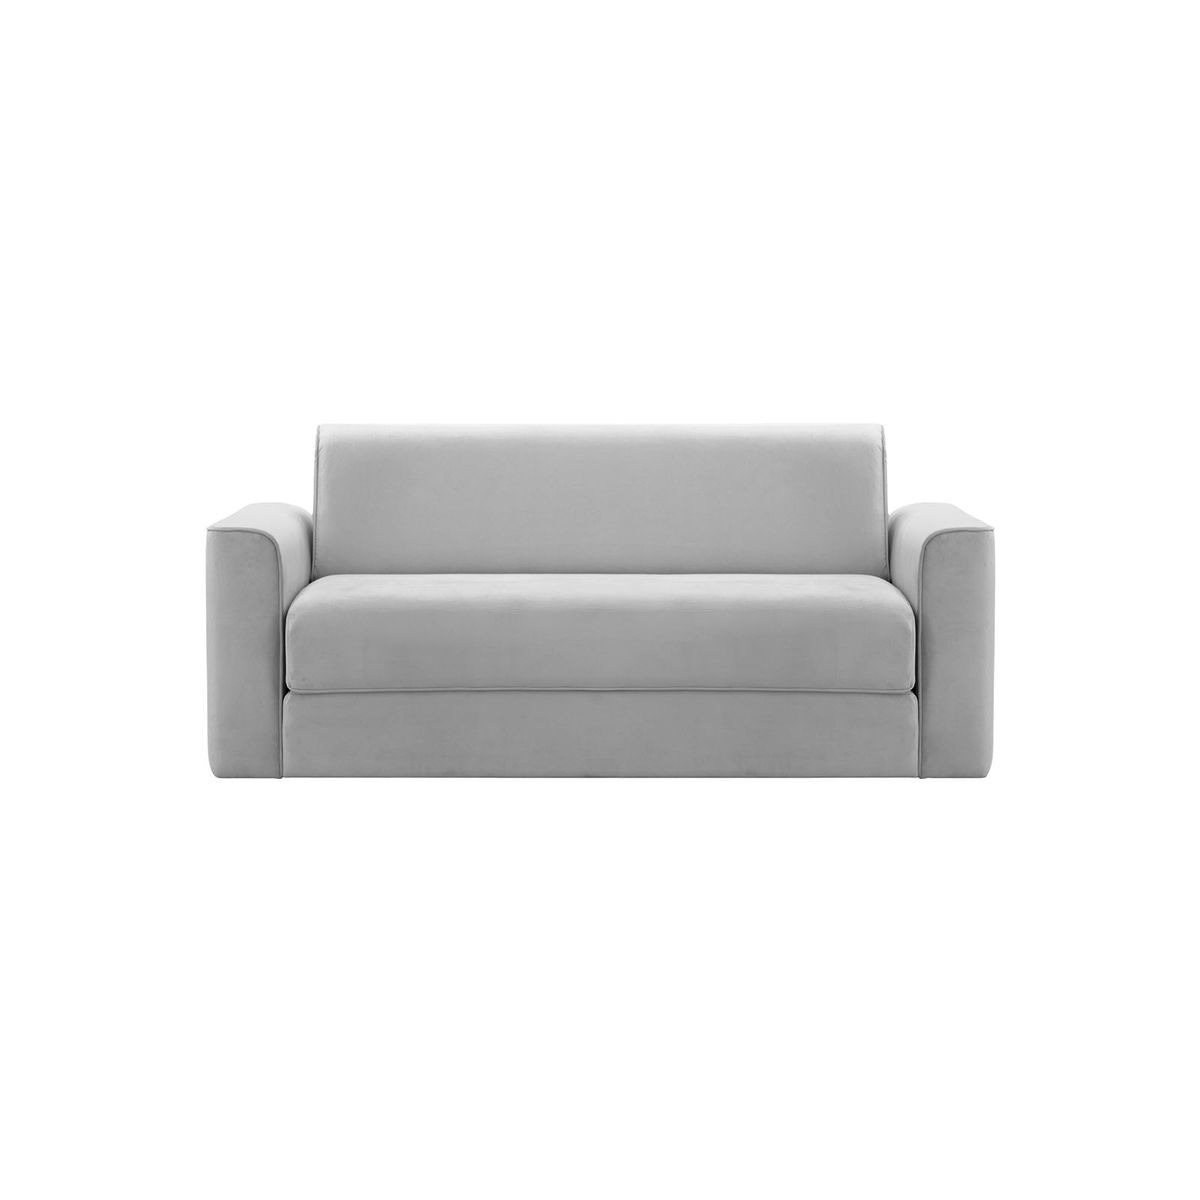 Jules 3 Seater Sofa Bed, silver - image 1